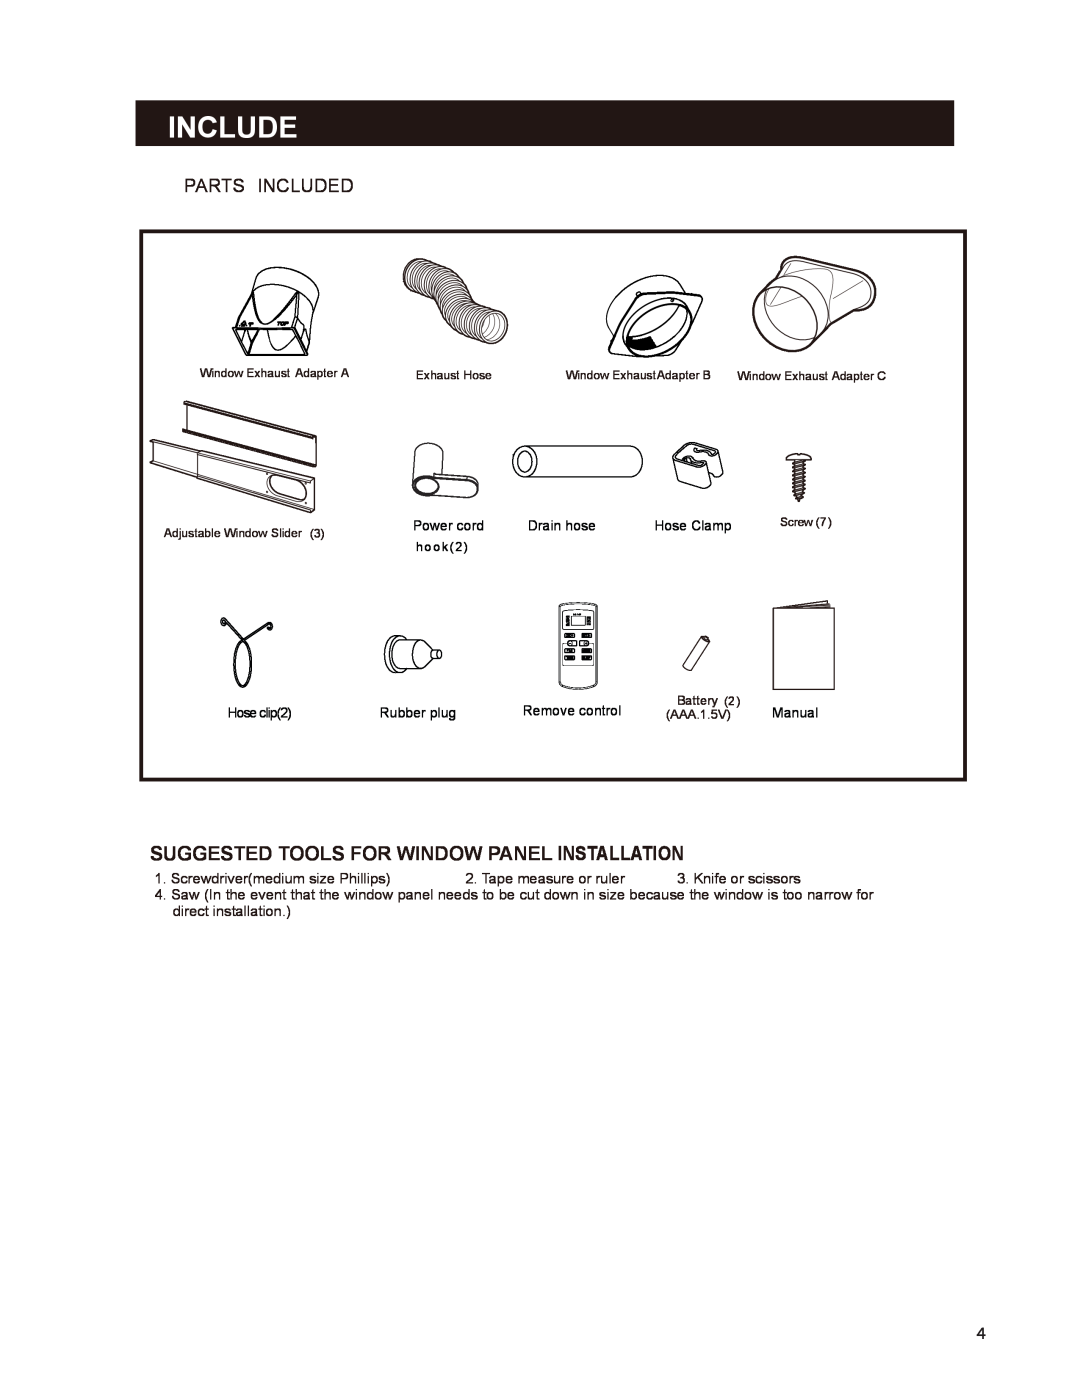 Soleus Air GM-PAC-10E2 manual Suggested Tools For Window Panel Installation, Parts Included 